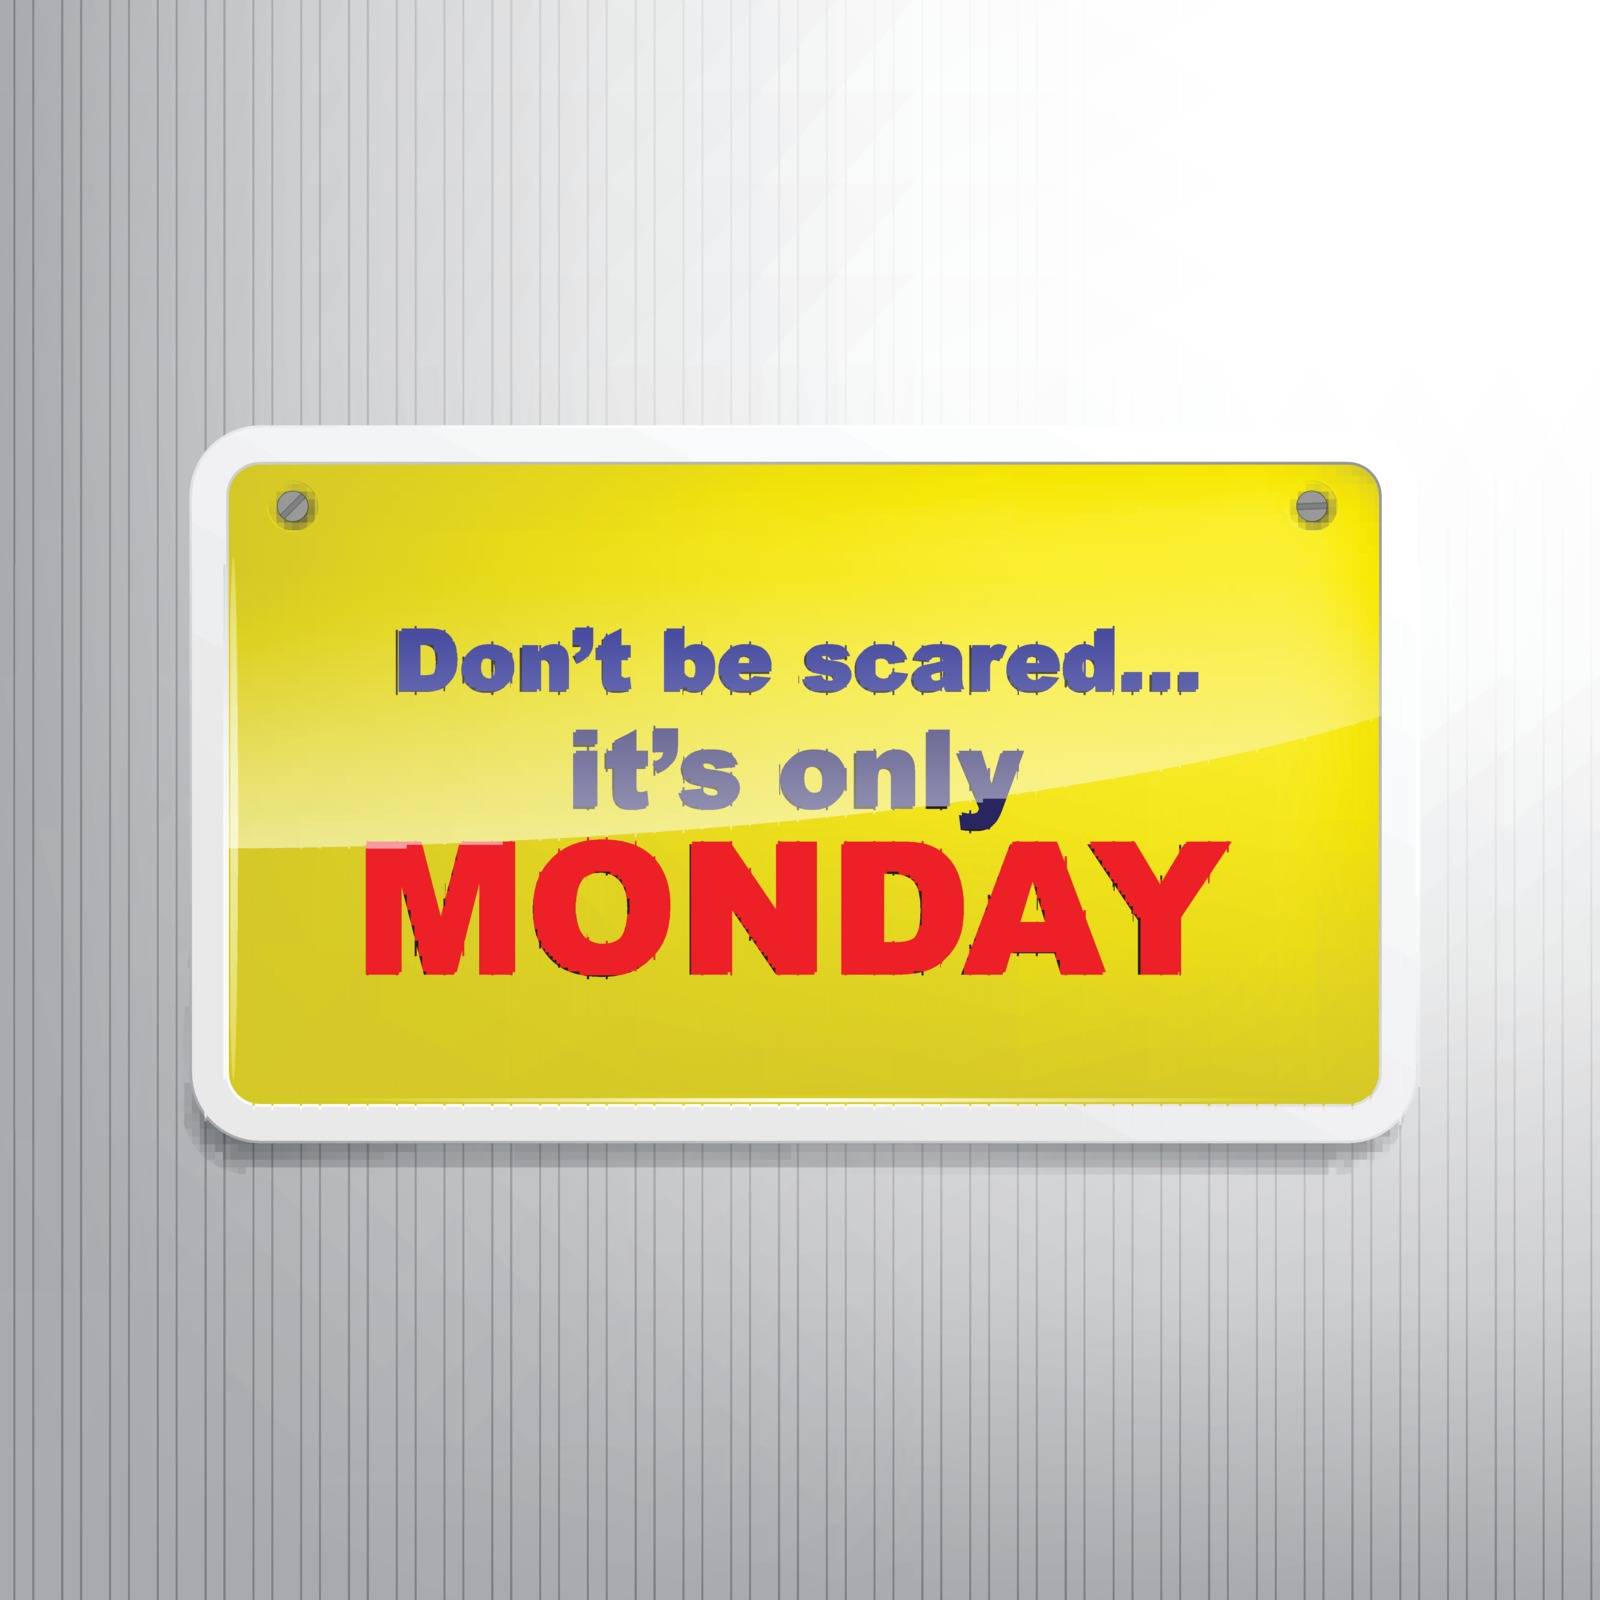 Don't be scared... it's only monday. Motivational sign